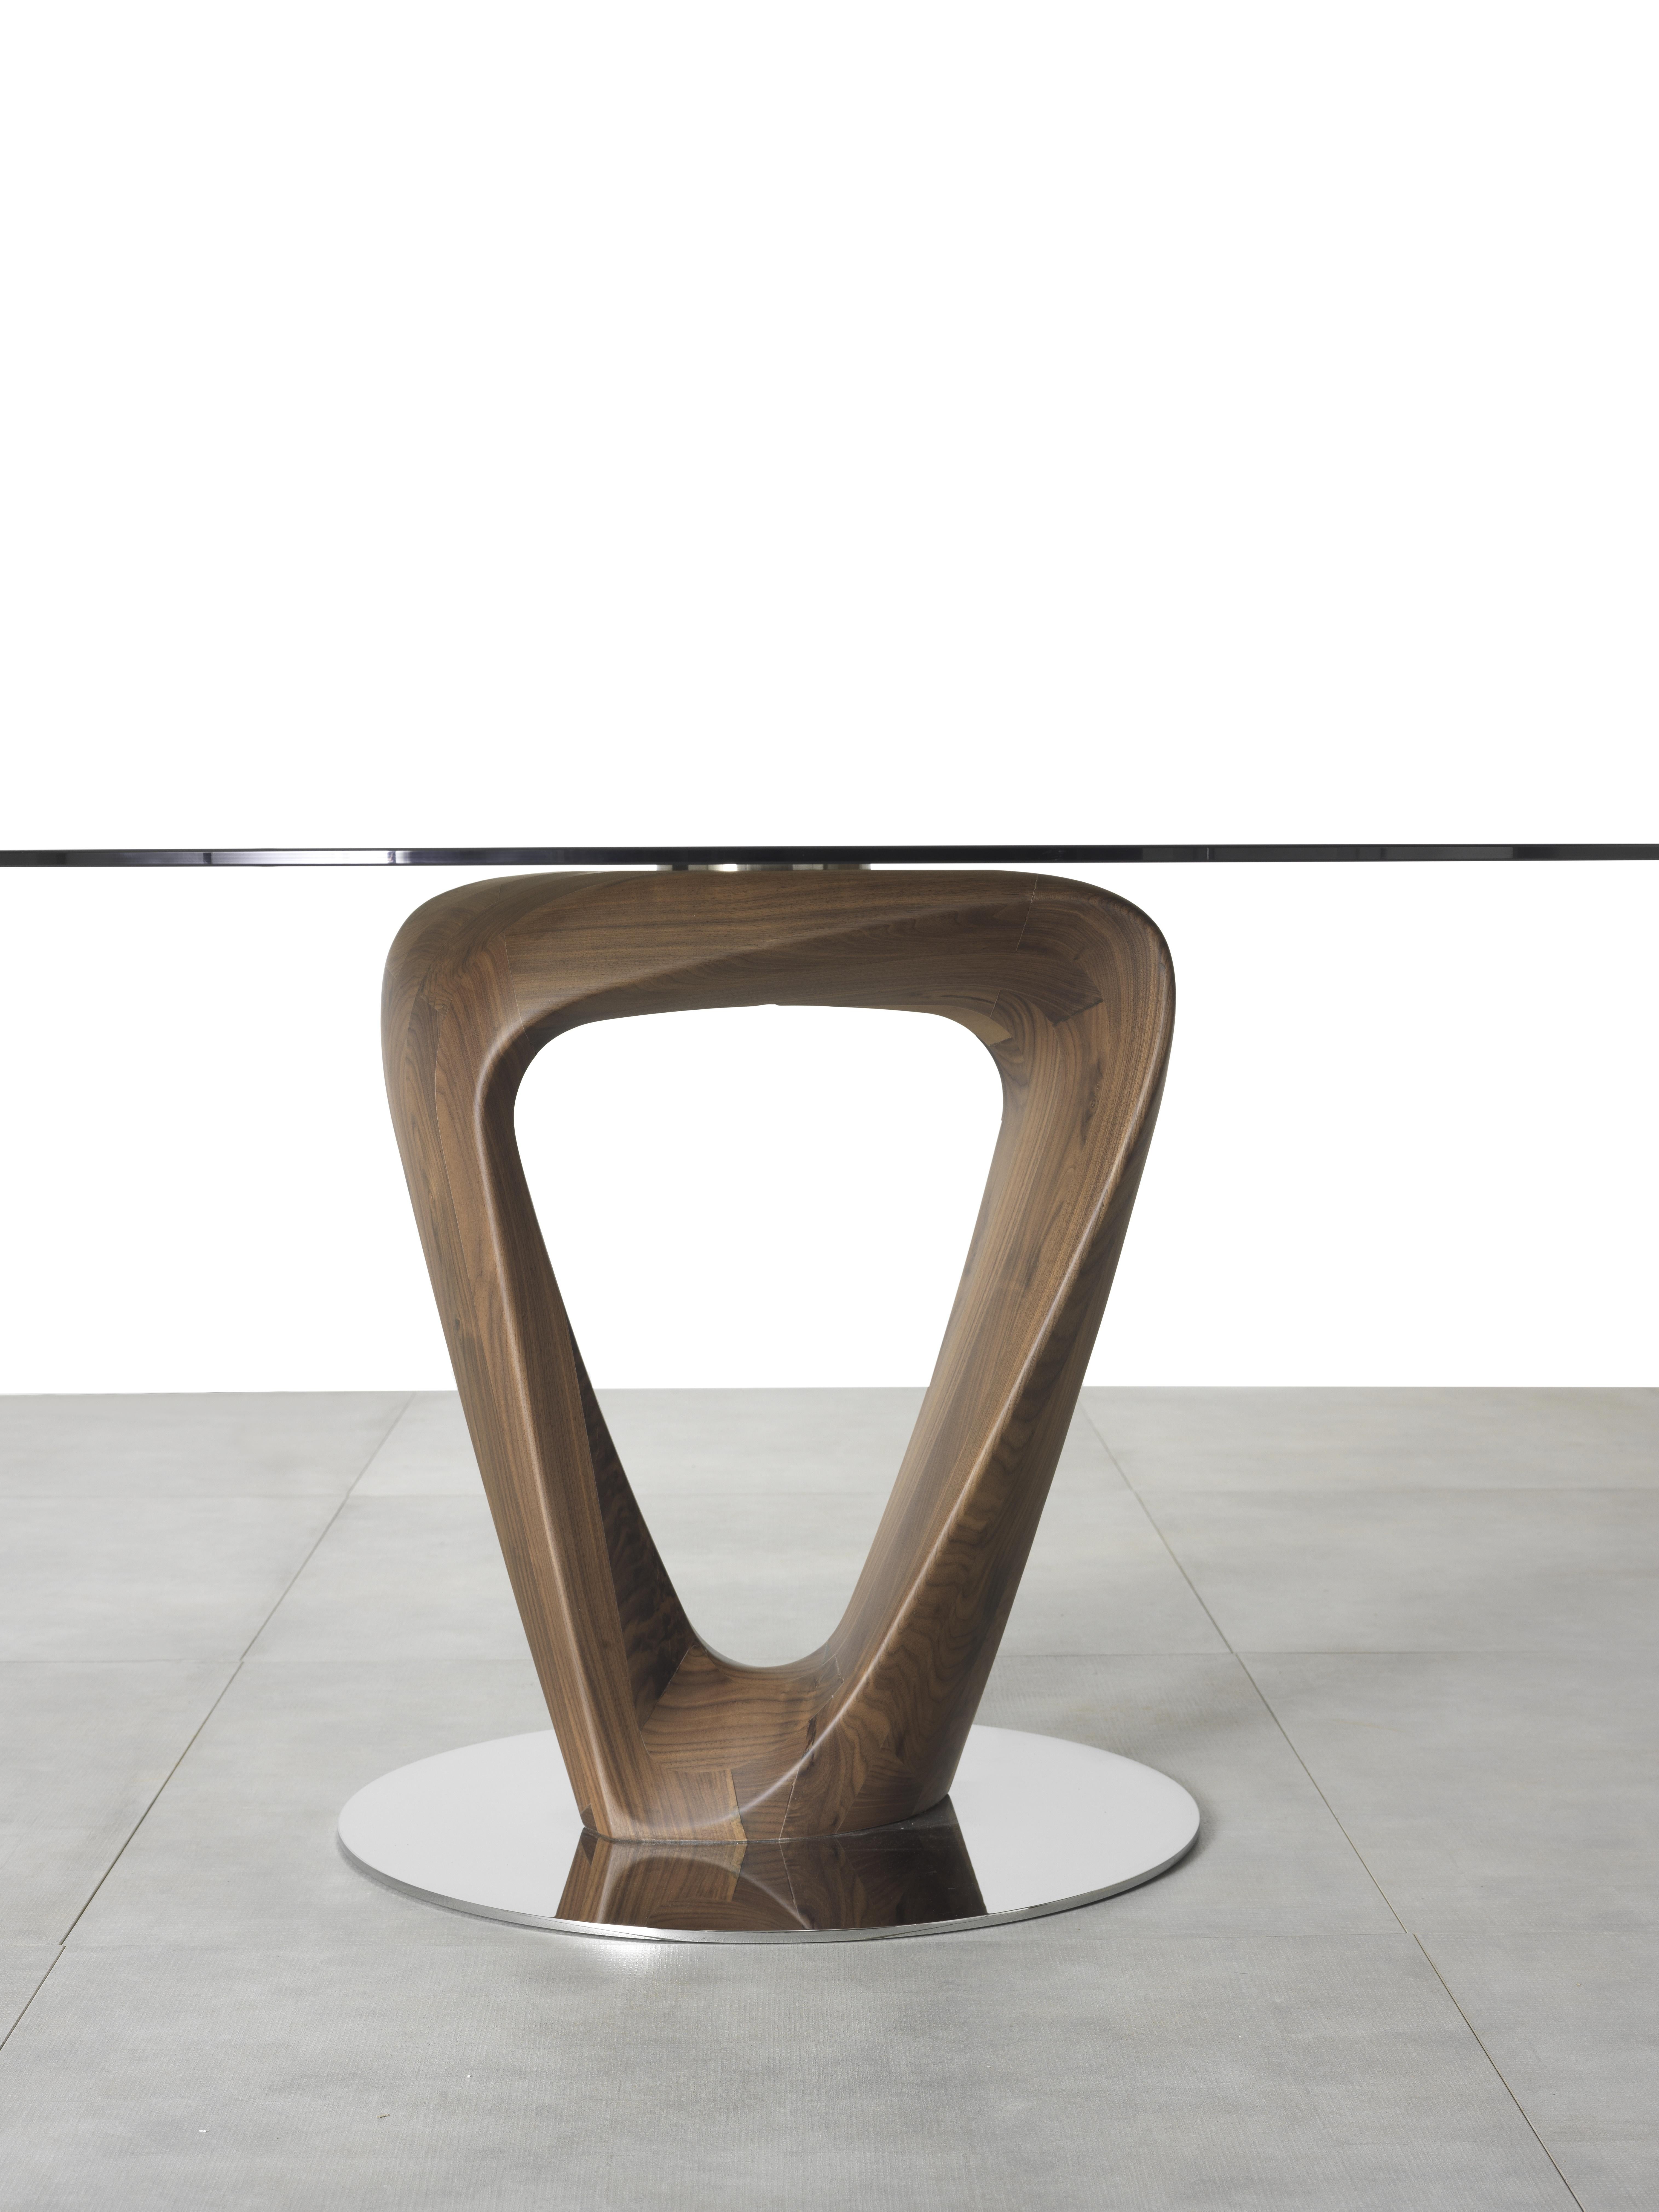 Dining table with base in solid canaletto walnut or ash. Bottom plate in chrome-plated metal. Top in tempered clear or transparent bronze glass (10 or 12 mm th.) with electro welded support. Available finishings: WG wengé, NC walnut, TB tobacco, NK